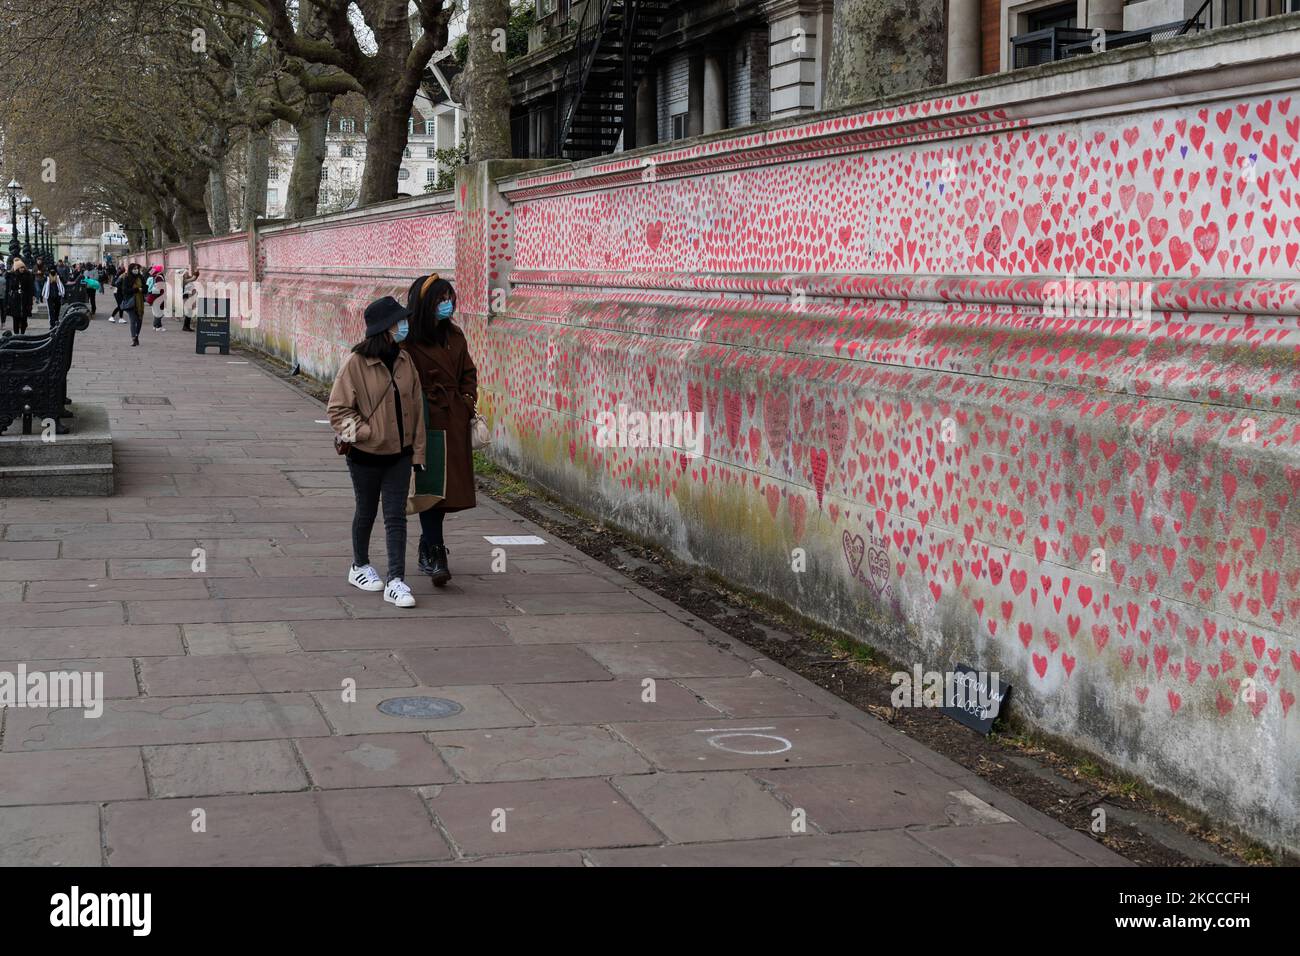 LONDON, UNITED KINGDOM - APRIL 07, 2021: People walk past a memorial for the victims of Covid-19 outside St Thomas’ Hospital on 07 April, 2021 in London, England. The mural, set up by Covid-19 Bereaved Families for Justice on Monday last week, has so far seen around 130,000 hand-drawn hearts placed on a kilometre-long section of wall facing the Houses of Parliament. (Photo by WIktor Szymanowicz/NurPhoto) Stock Photo